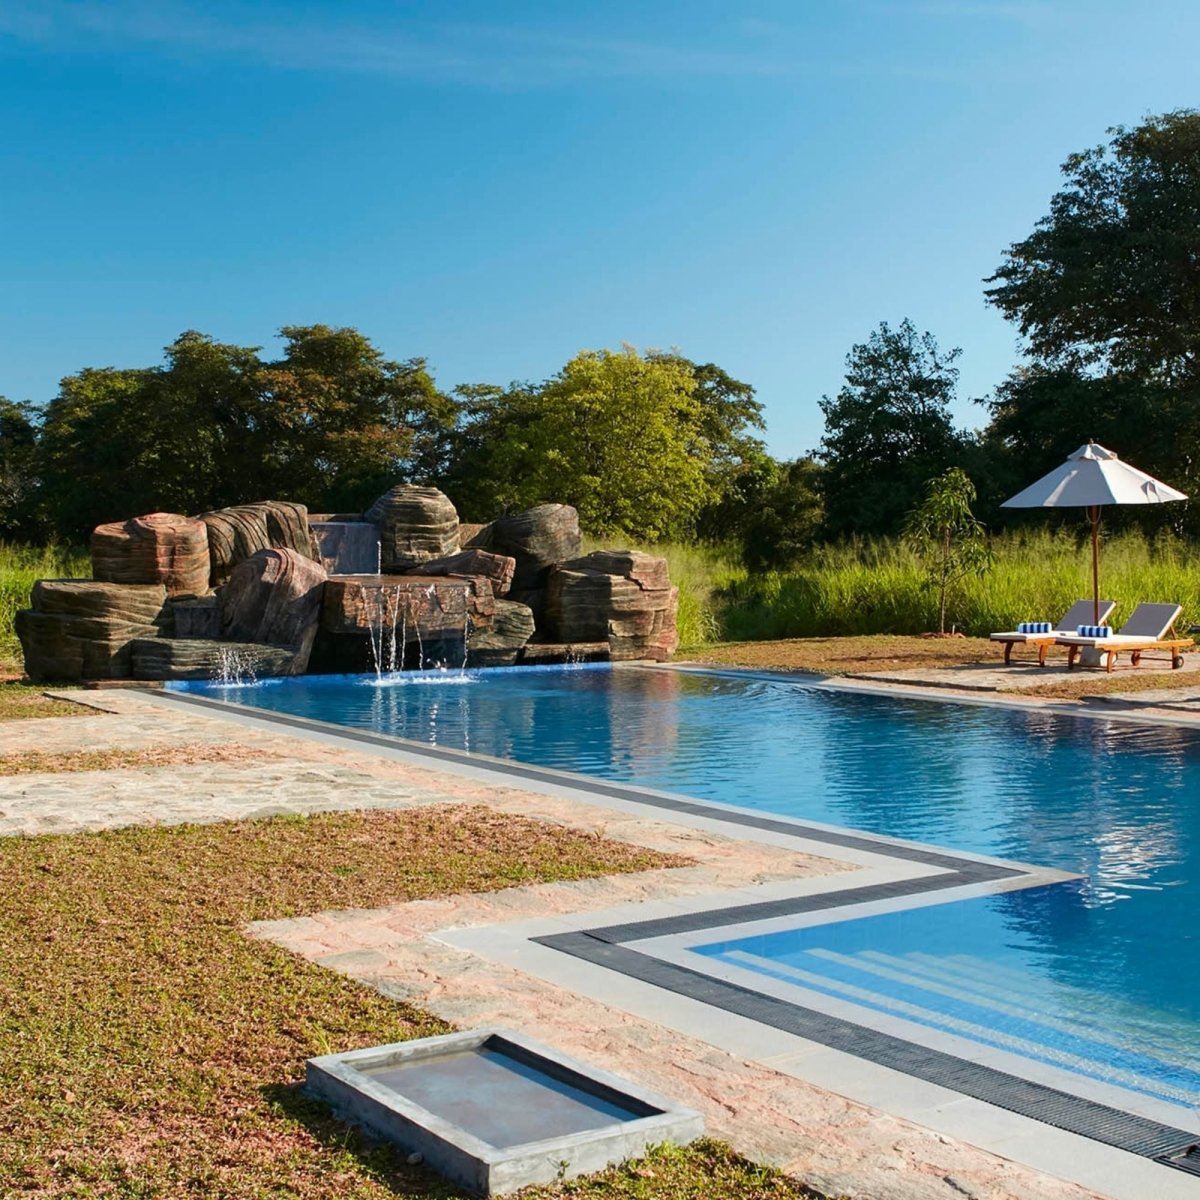 3 Days with Private Jacuzzi, Full-board, and pool access for 2 people - Seerock The King’s Domain Hotel, Sigiriya | Feelo